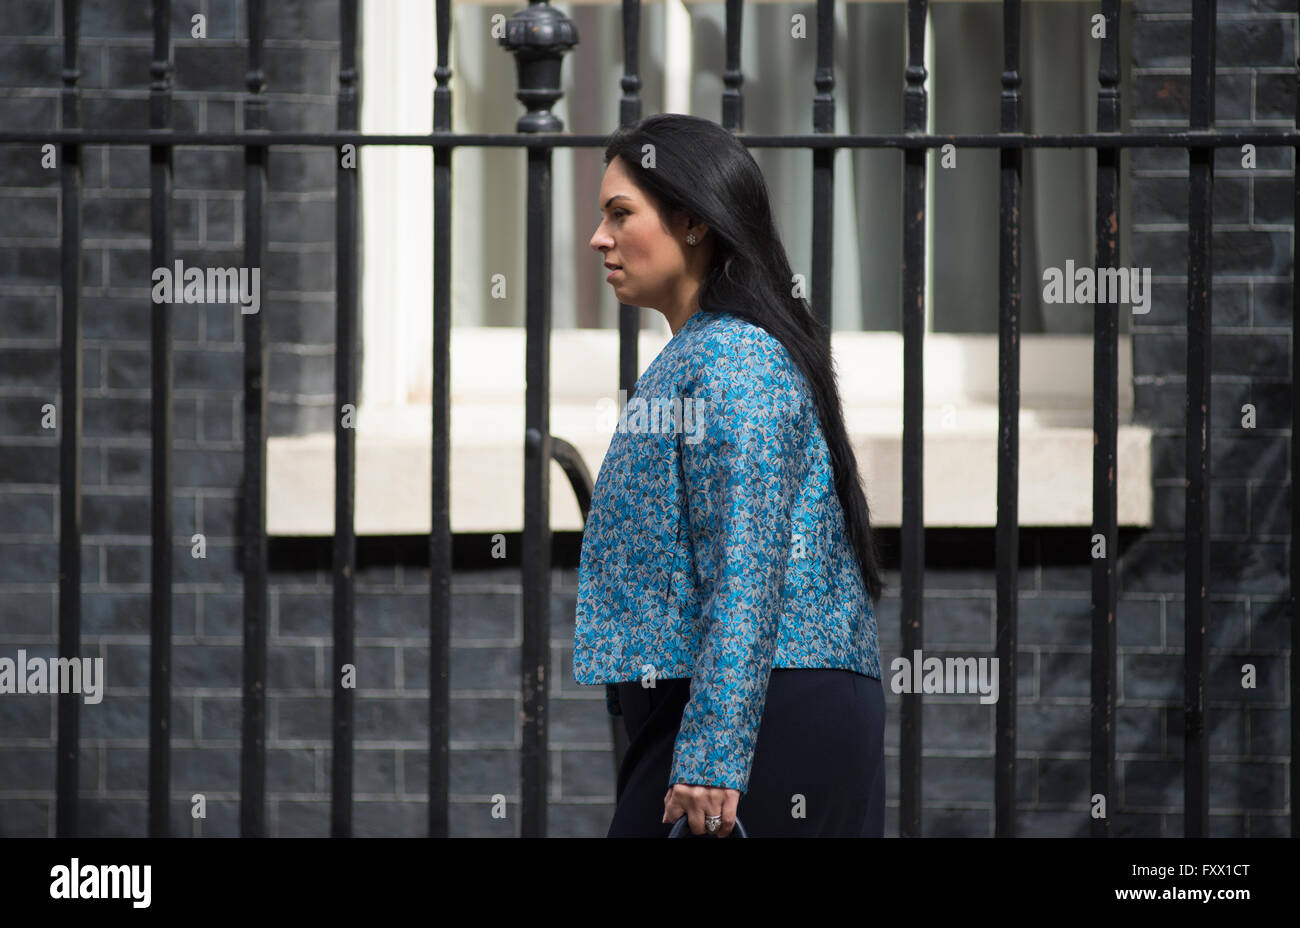 10 Downing Street, London, UK. 19th April, 2016. Minister of State for Employment Priti Patel MP leaves Downing Street after weekly Cabinet Meeting. In November 2017 she resigned as Secretary of State for International Development following newspaper disclosures. Credit: Malcolm Park/Alamy Live News. Stock Photo